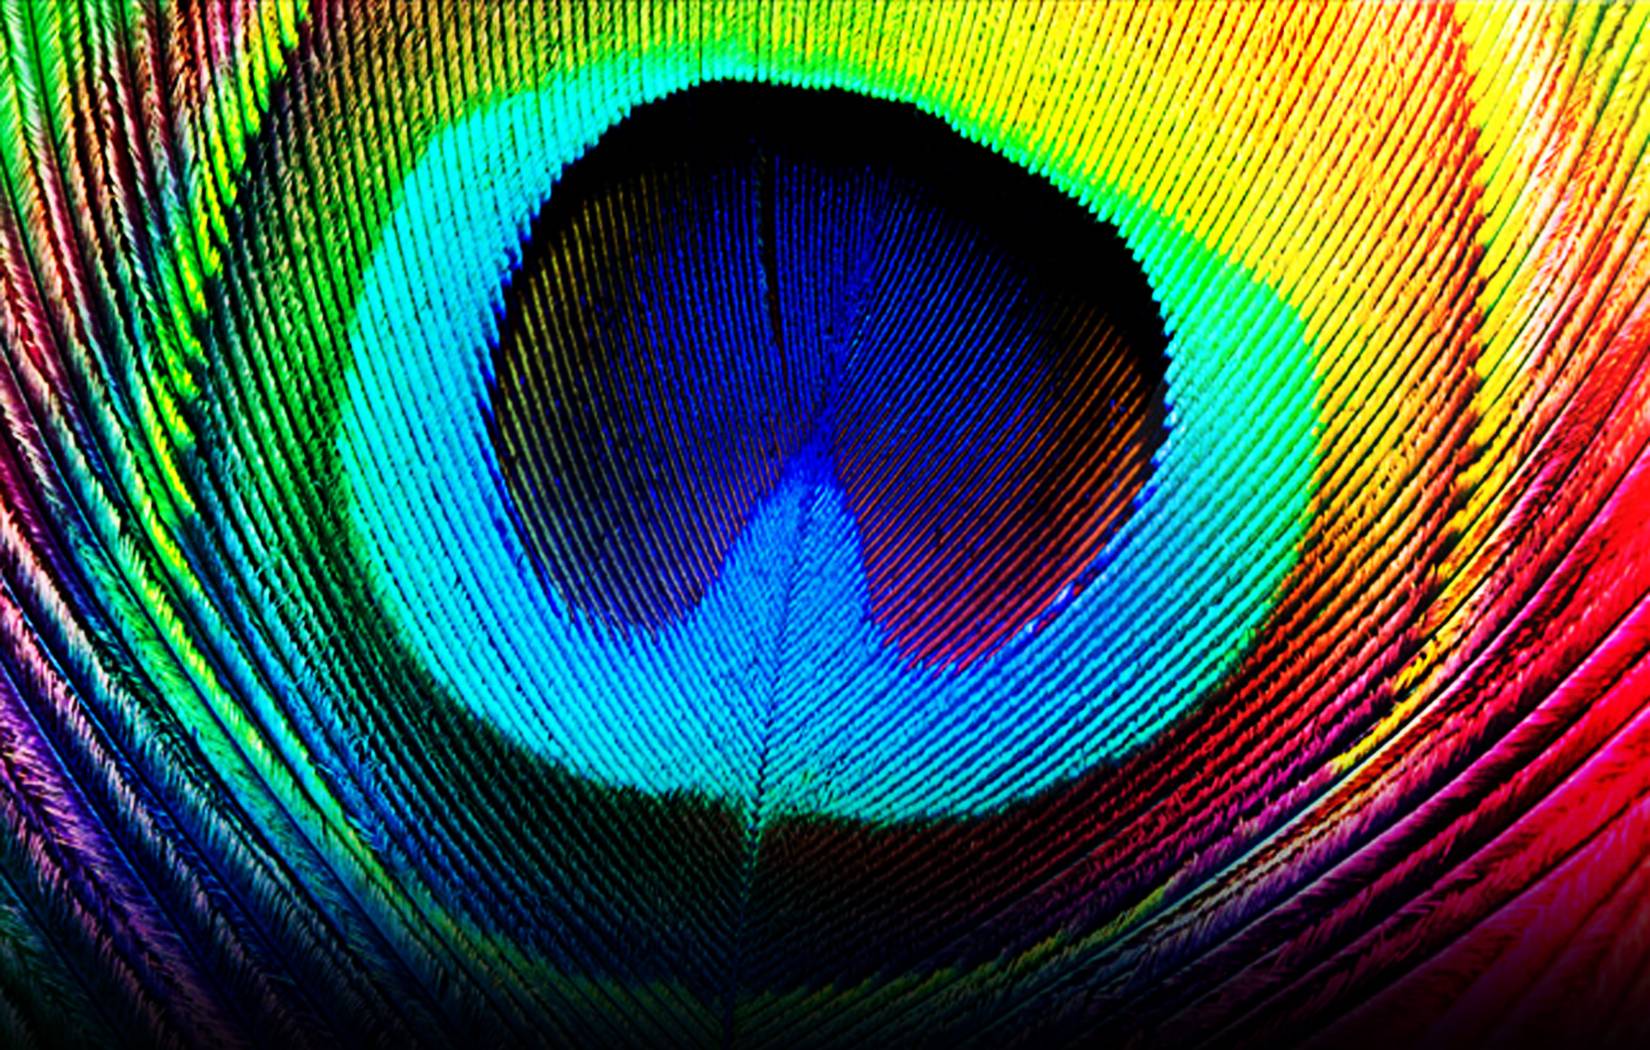 Wallpaper Of Peacock Feathers HD